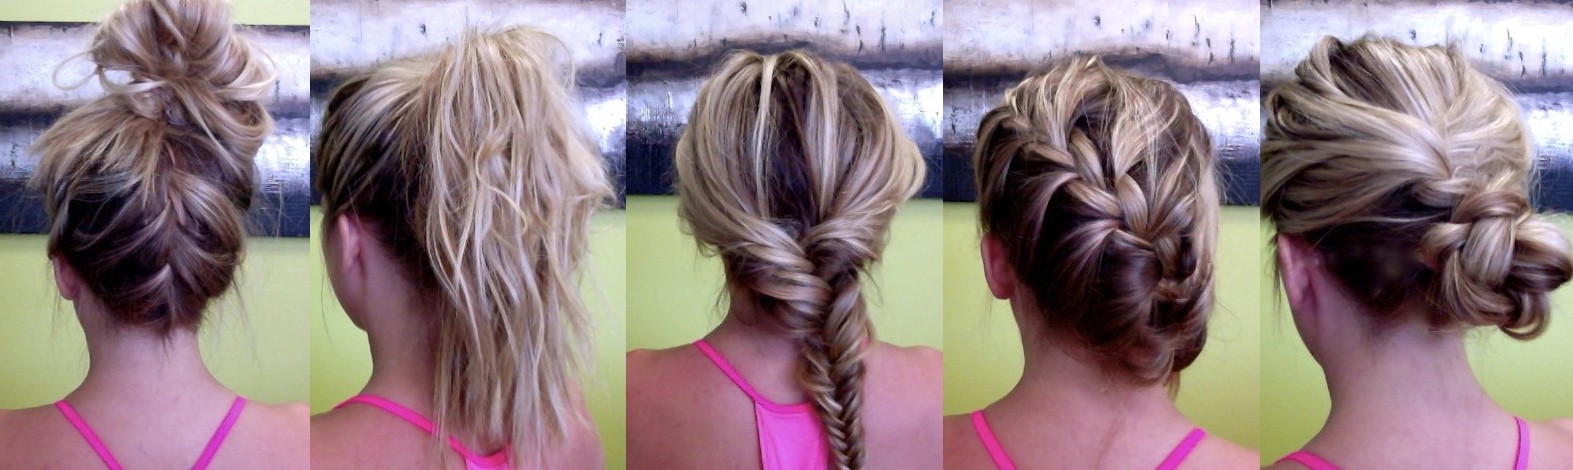 5 Quick & Easy Hairstyles For The Barre! - Neighborhood Barre